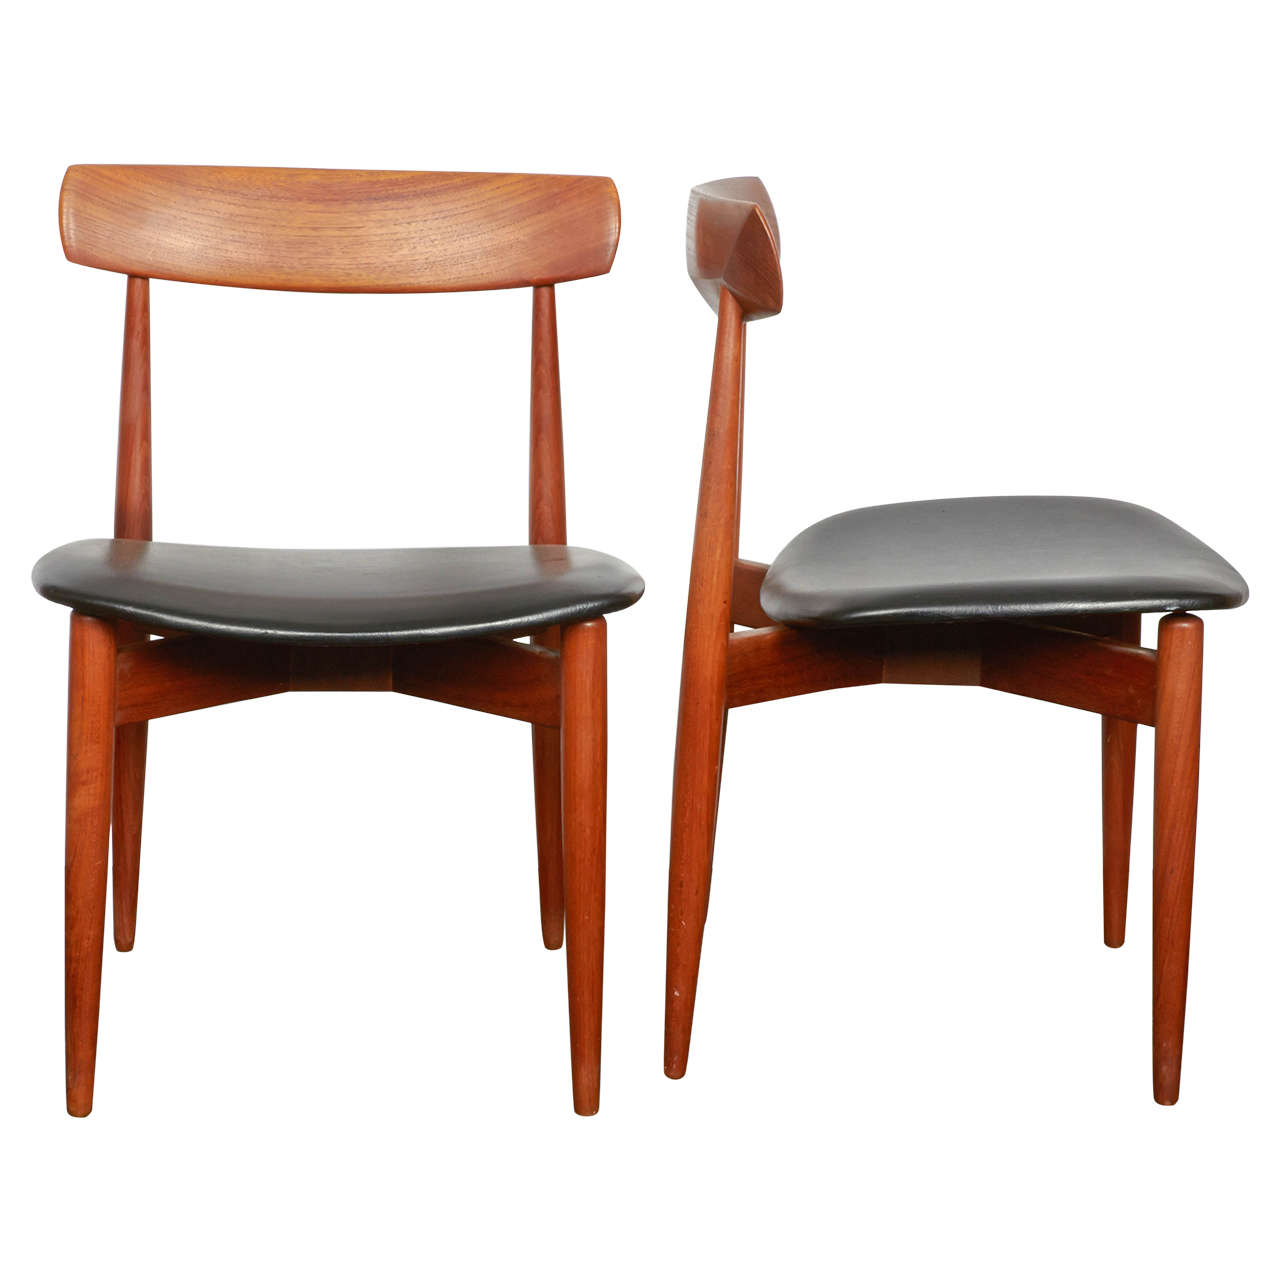 Four Scandinavian Dining Chairs by H.W. Klein, Manufactured by Bramin, 1950s